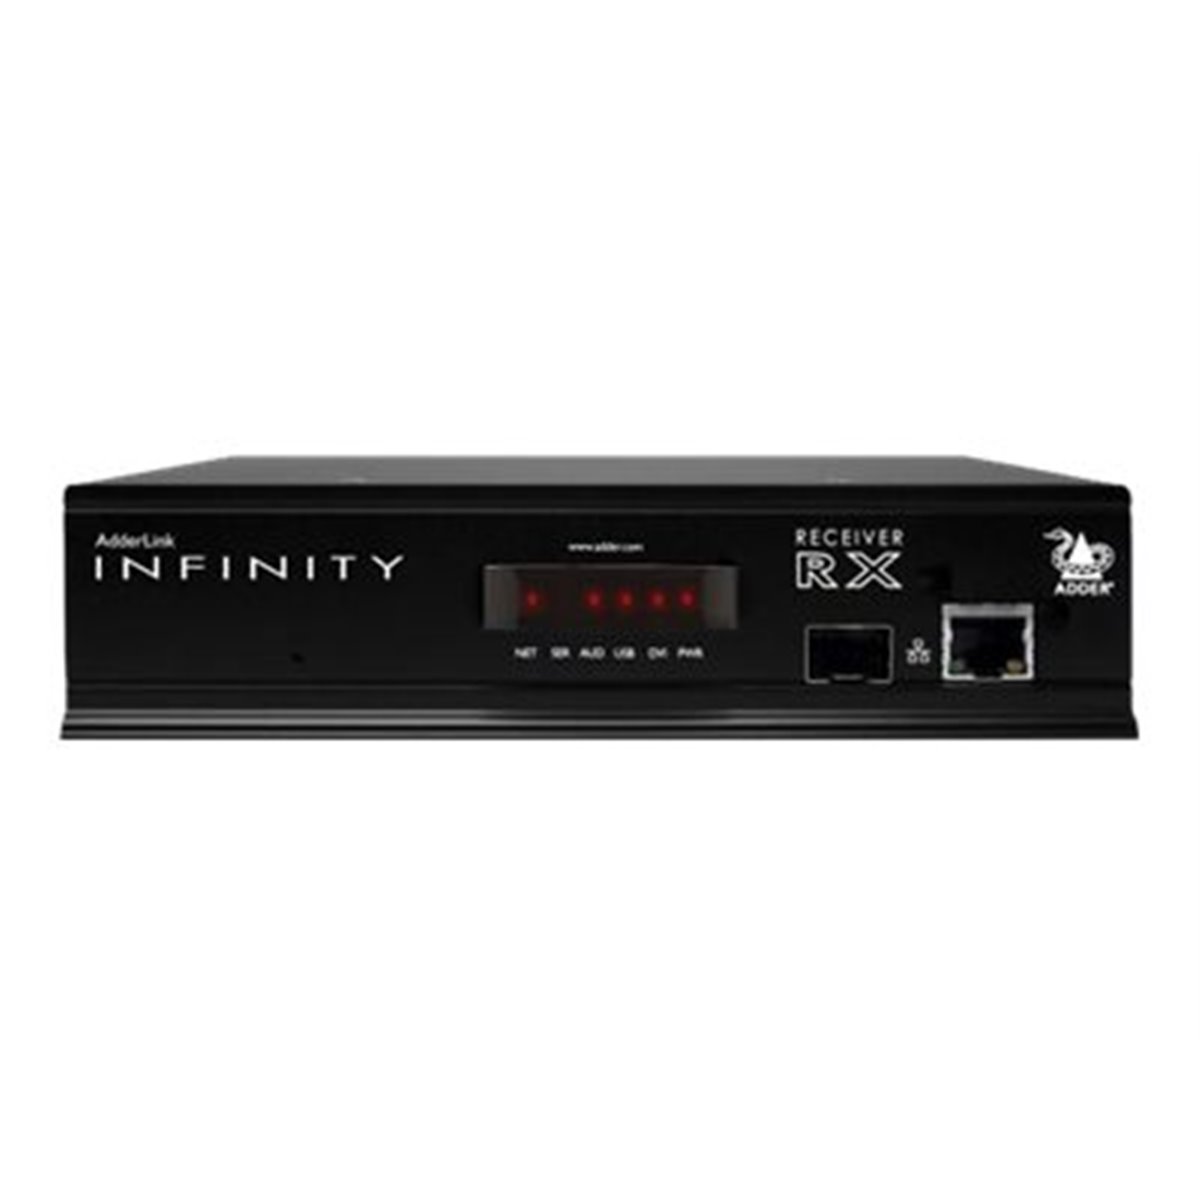 Adder Link Infinity Single with SFP. RECEIVER